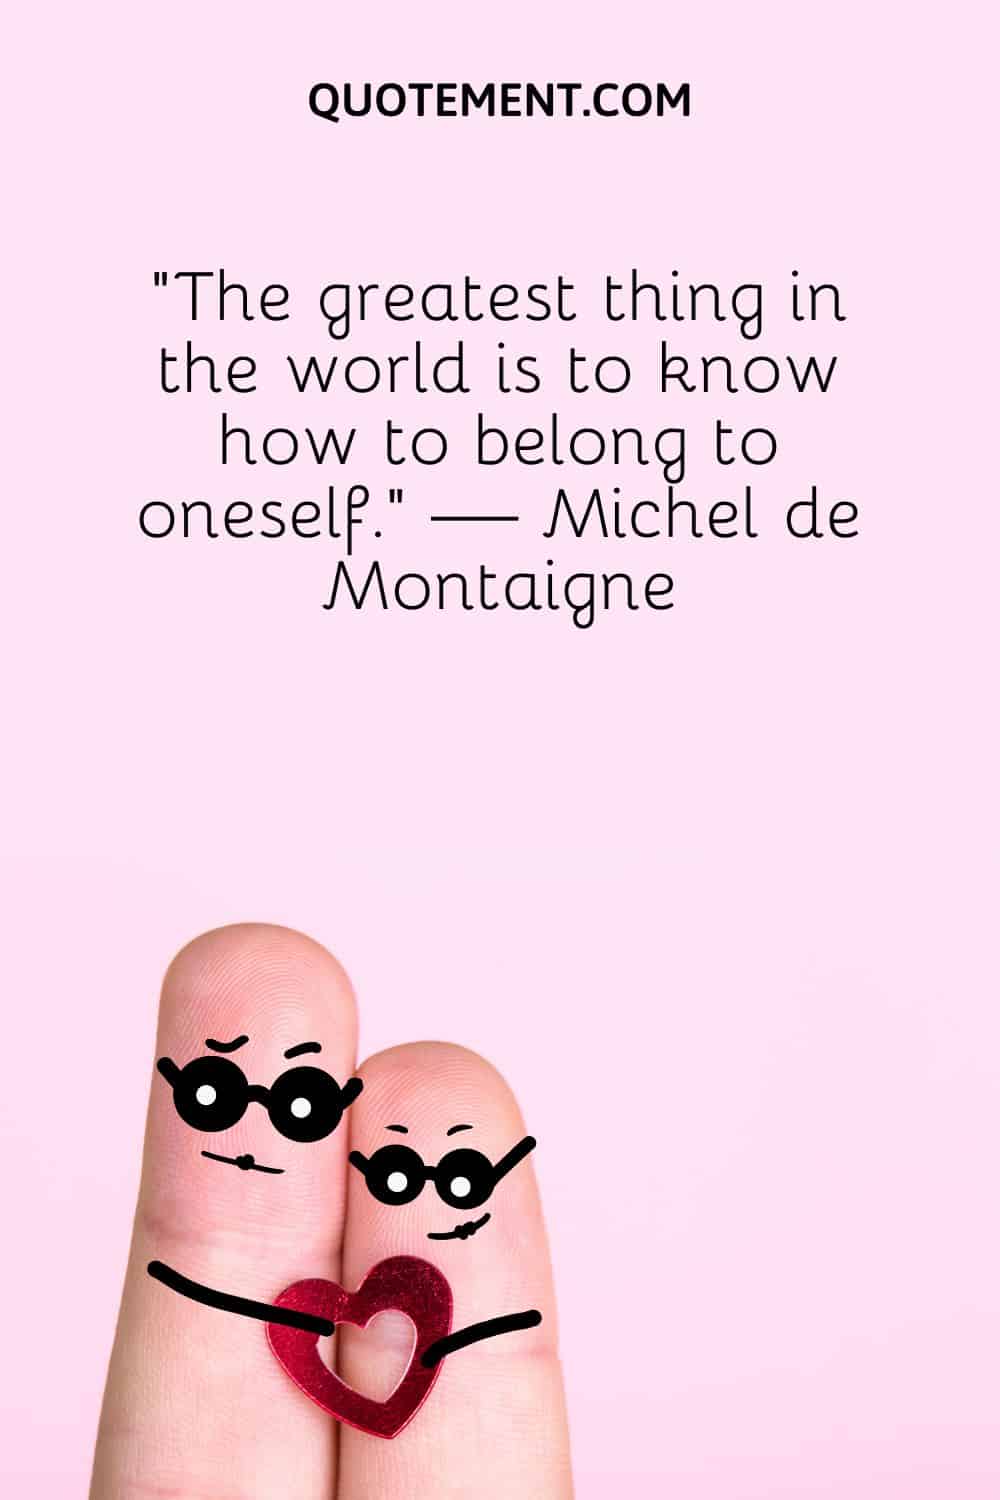 “The greatest thing in the world is to know how to belong to oneself.” — Michel de Montaigne